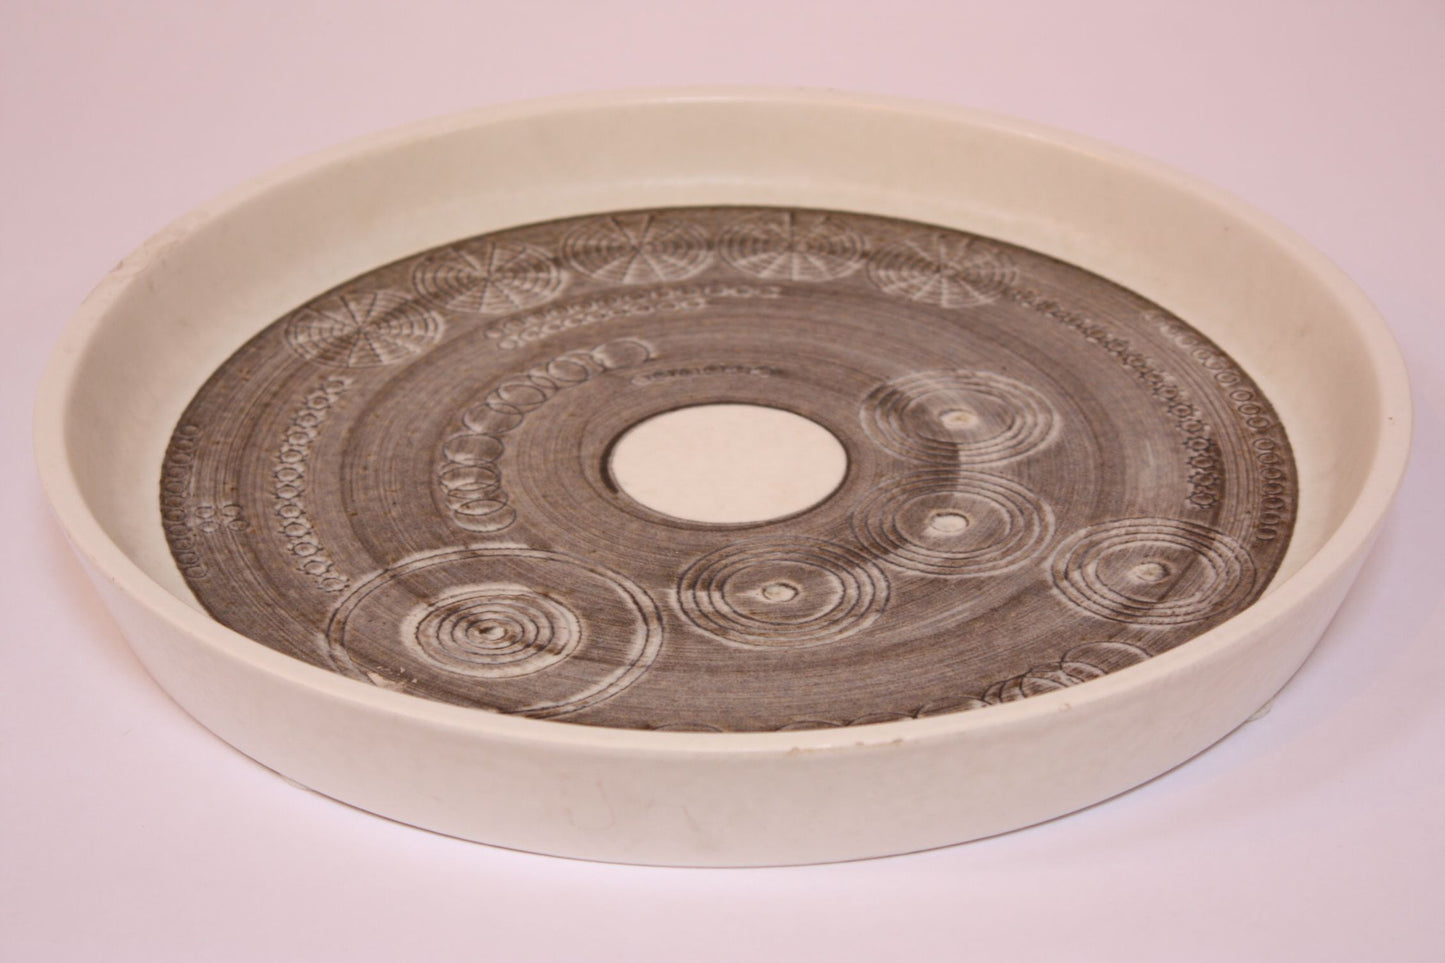 Large plate designed by Olle Alberius for Rorstrand